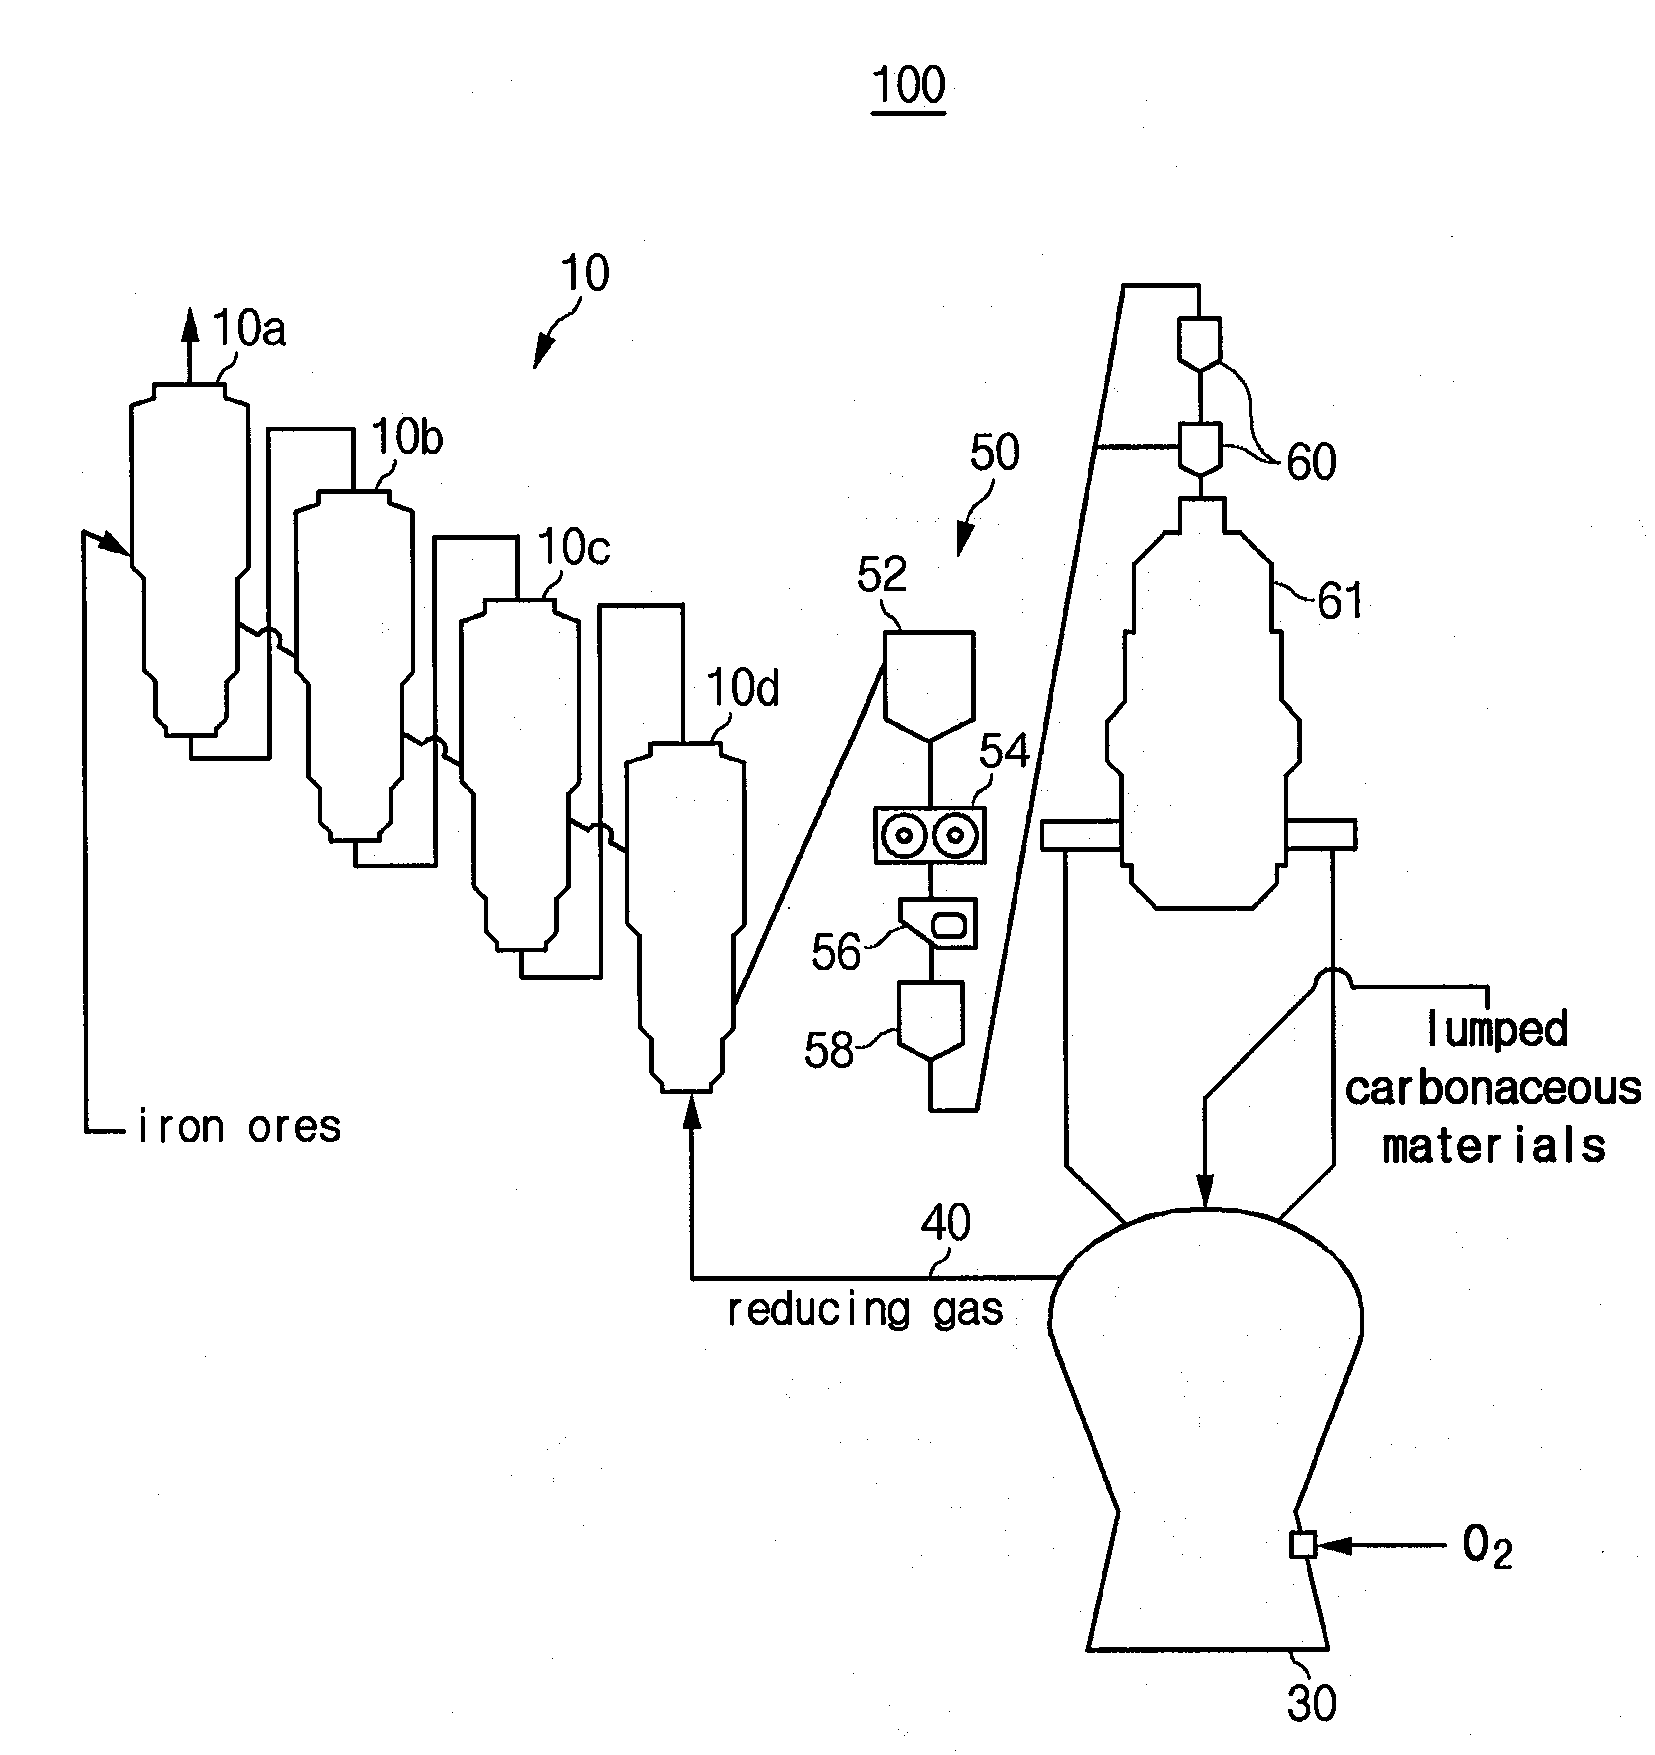 Apparatus for Manufacturing Molten Irons